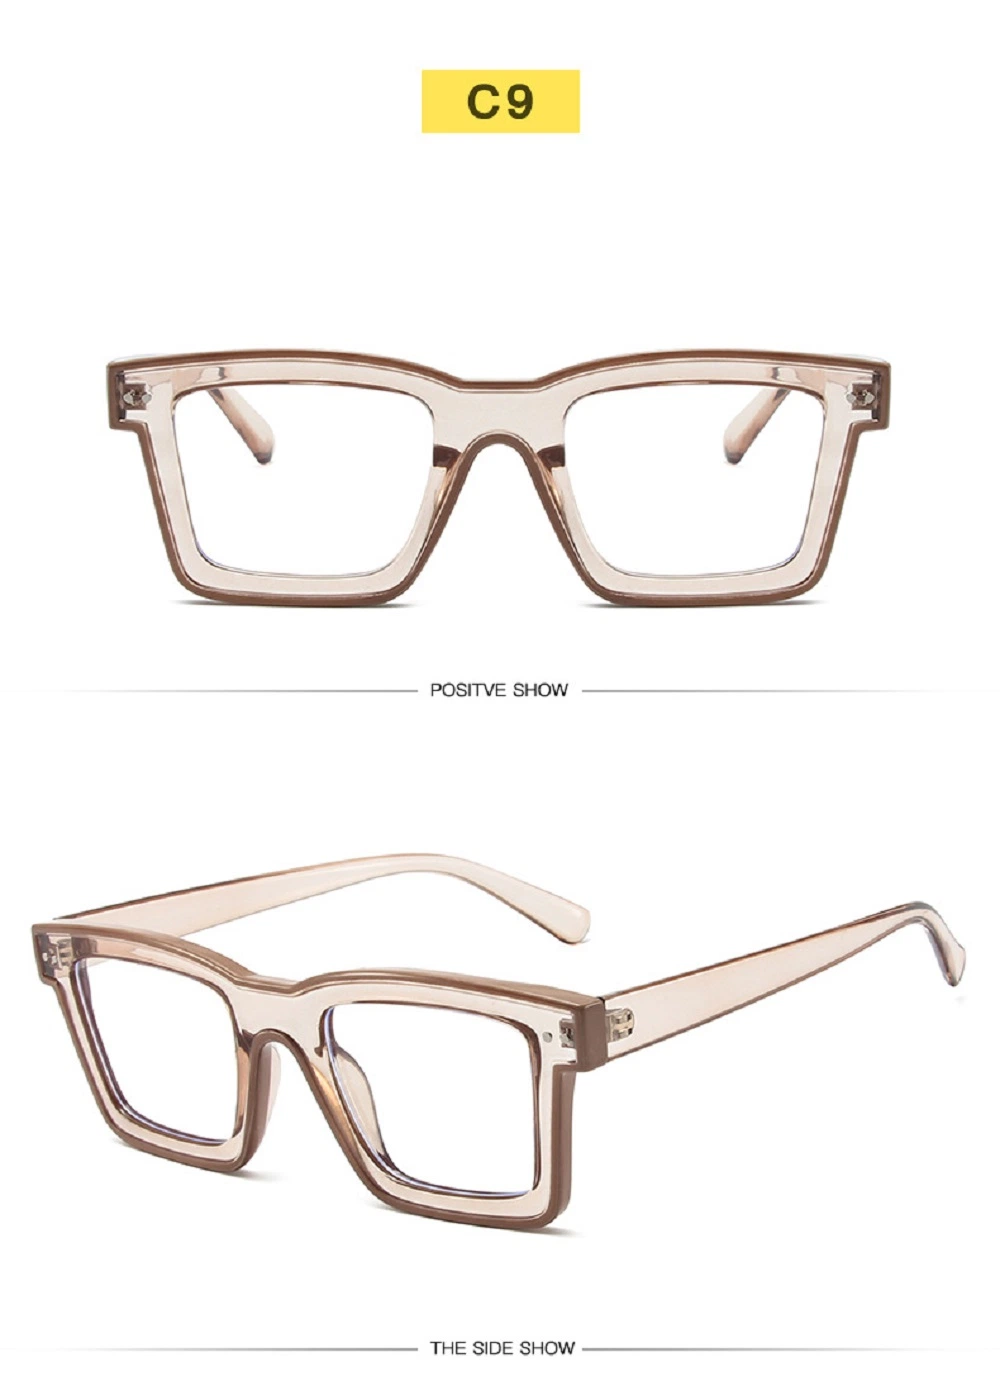 Oversized TR90 Square Eyewear High Quality Colorful Fashion HD Lens Anti-Blue Light Transparent Men Women Spectacles